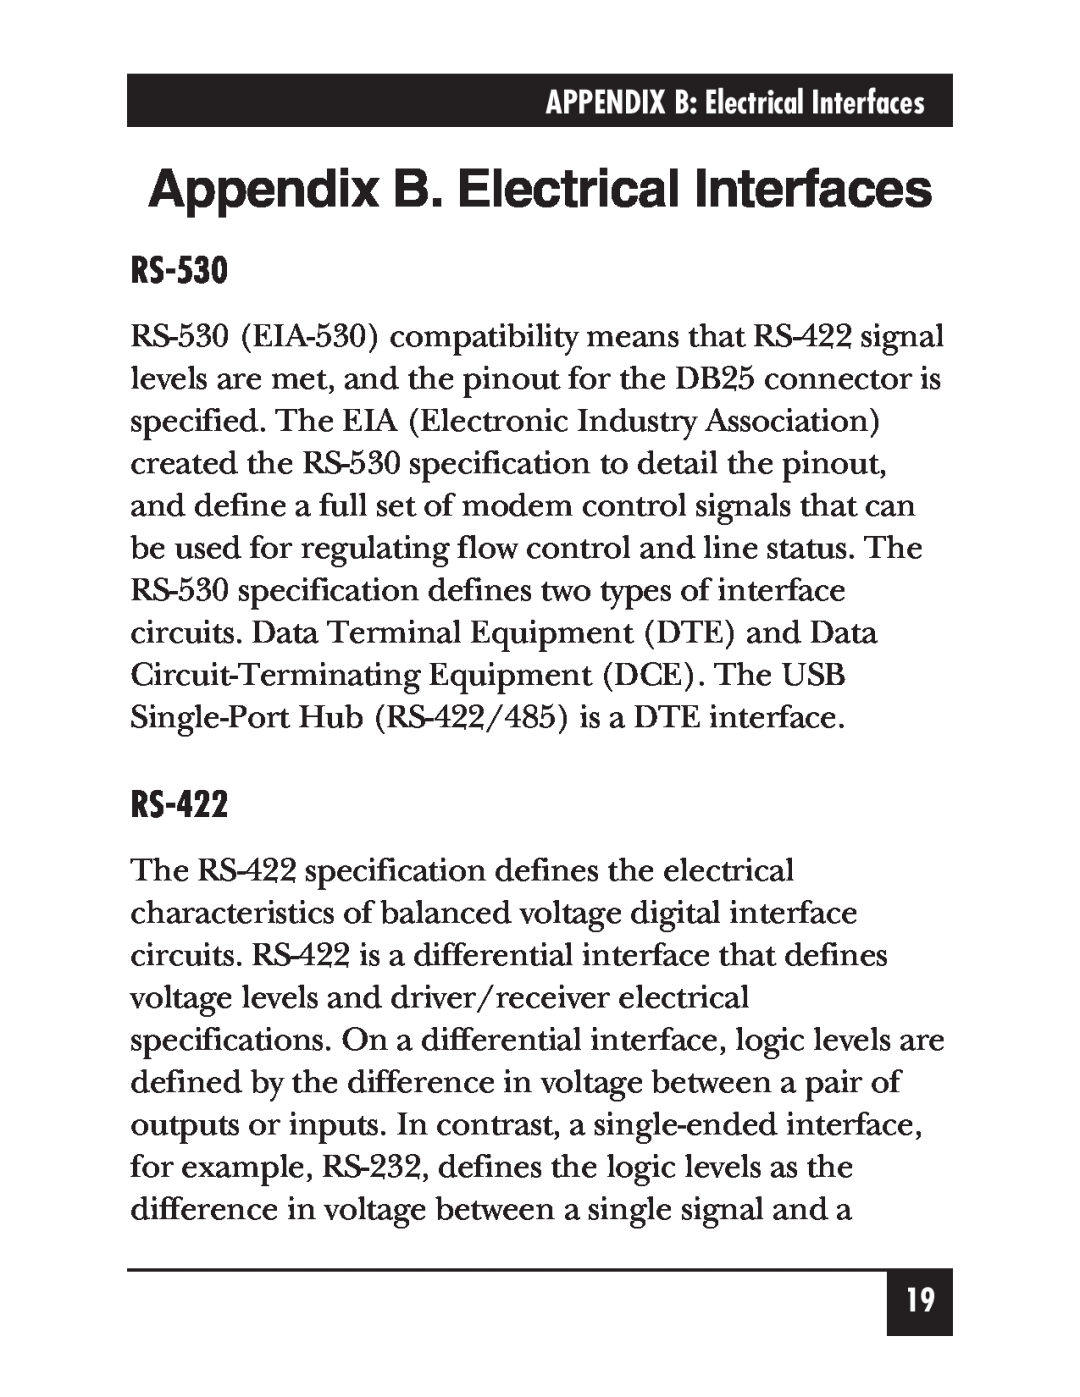 Black Box IC266A manual Appendix B. Electrical Interfaces, RS-530, RS-422 